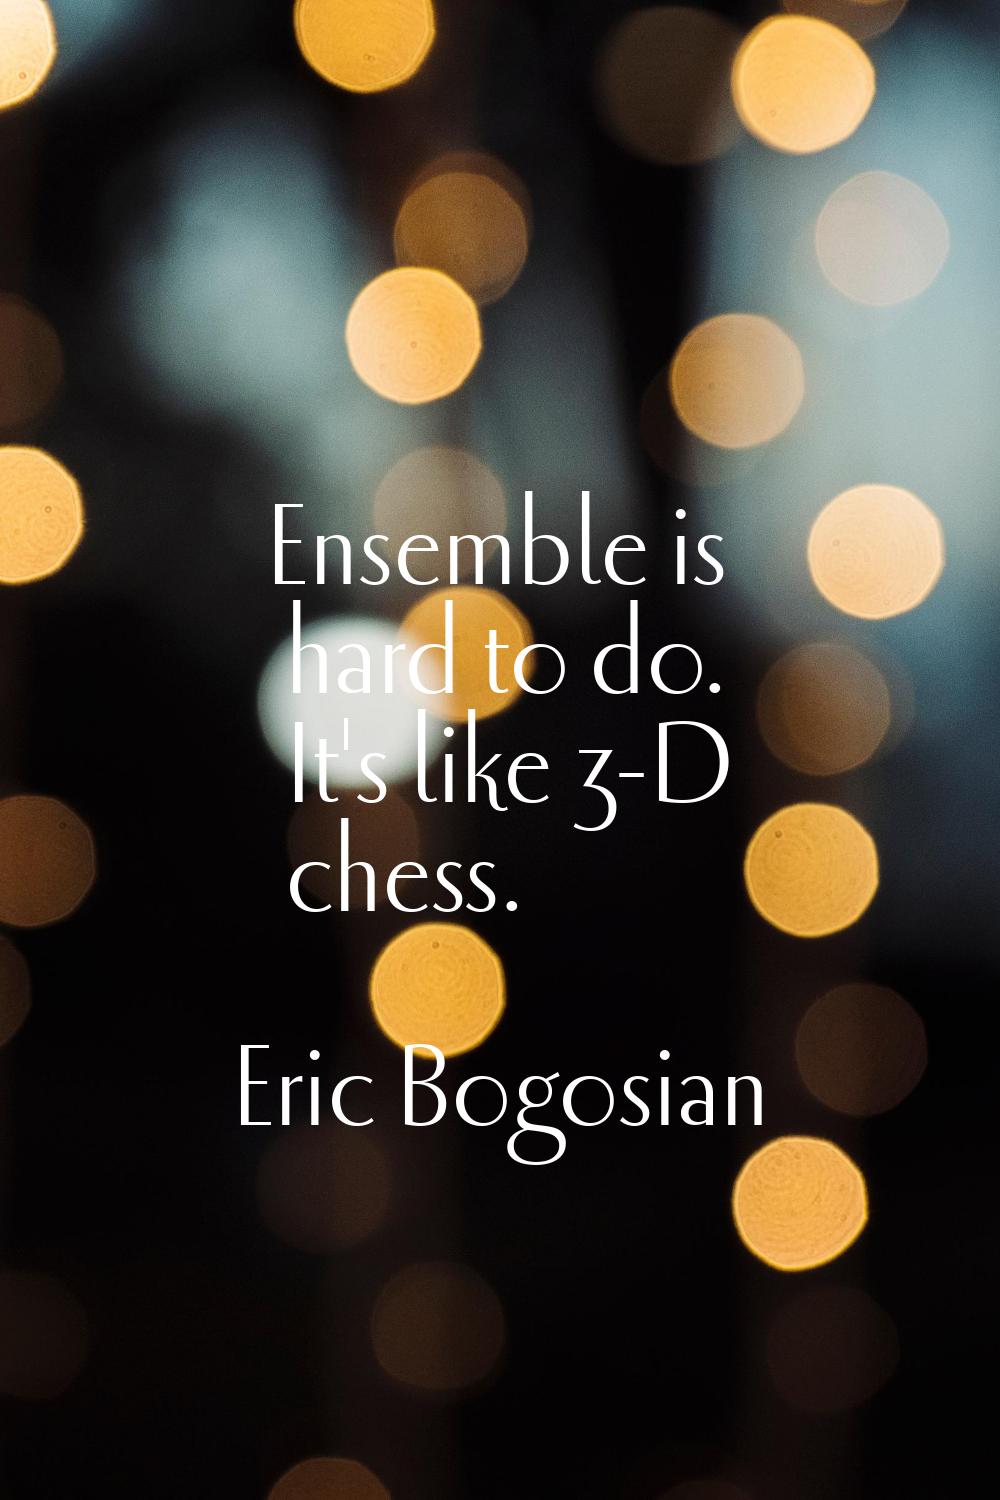 Ensemble is hard to do. It's like 3-D chess.